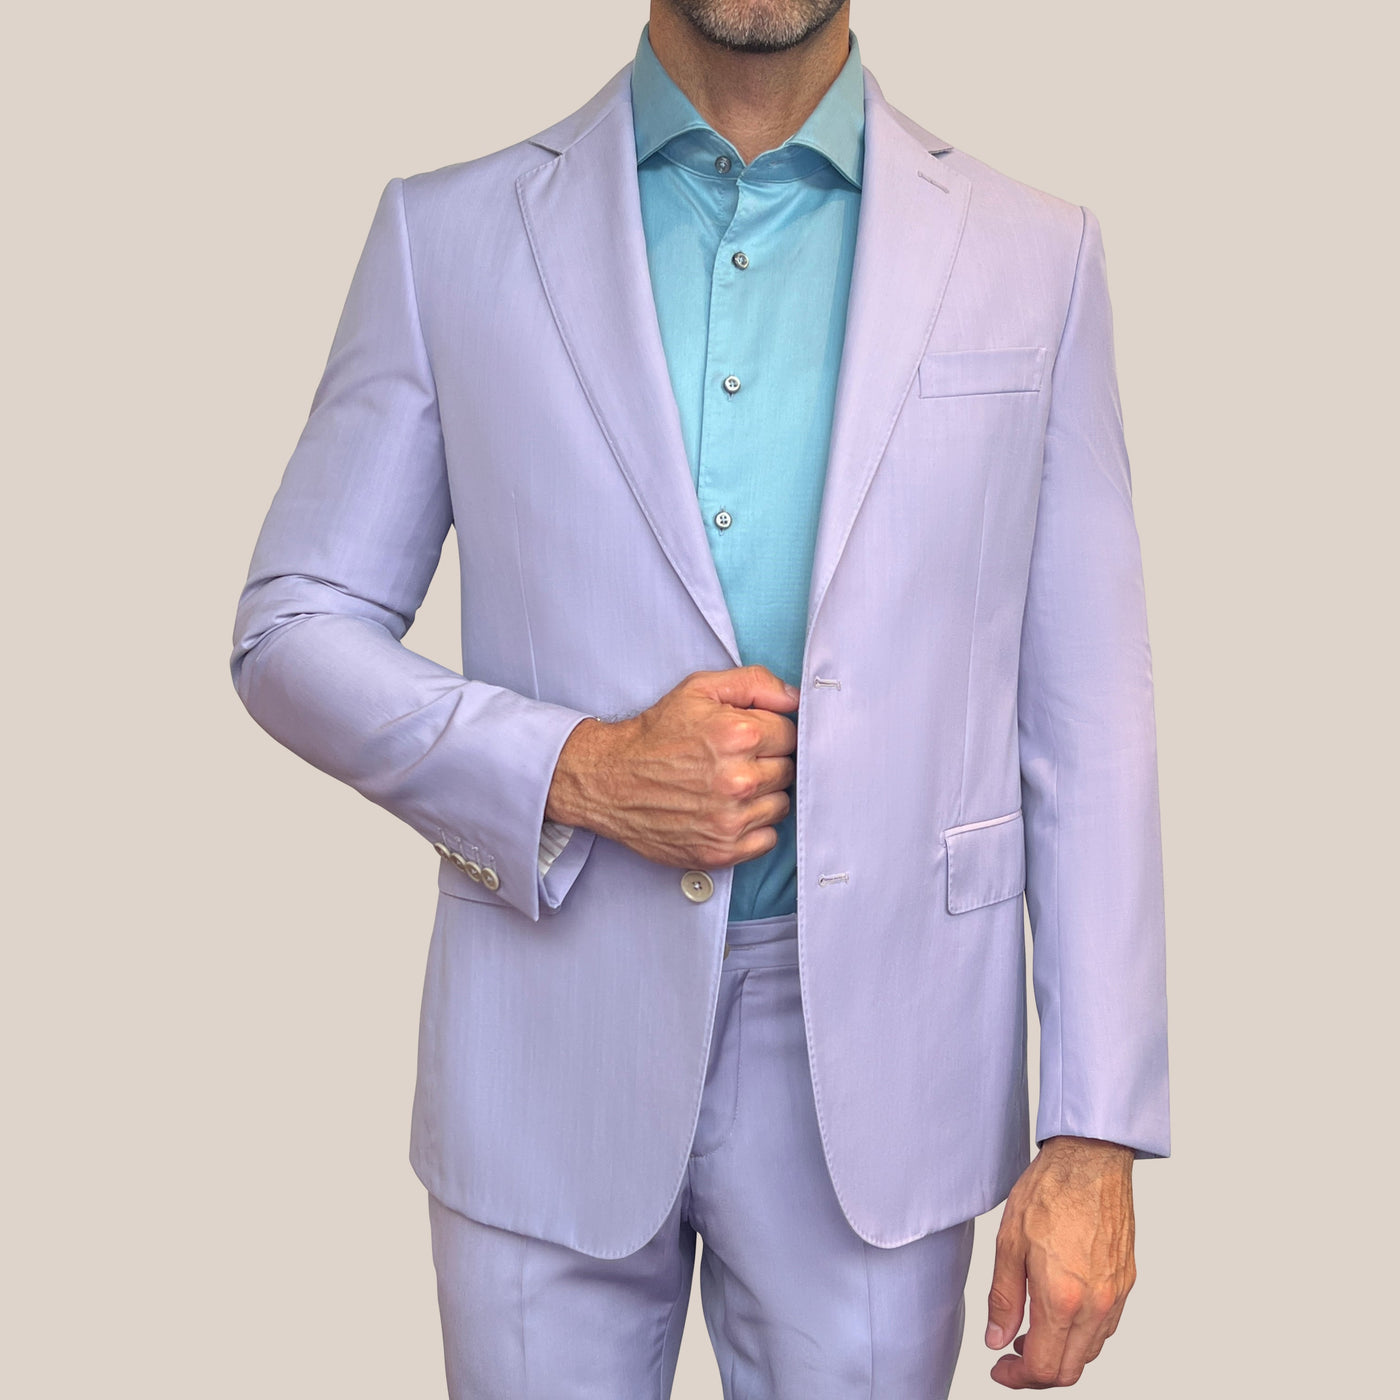 Gotstyle Fashion - Pal Zileri Suits Wool / Lyocell Blend Suit - Lilac